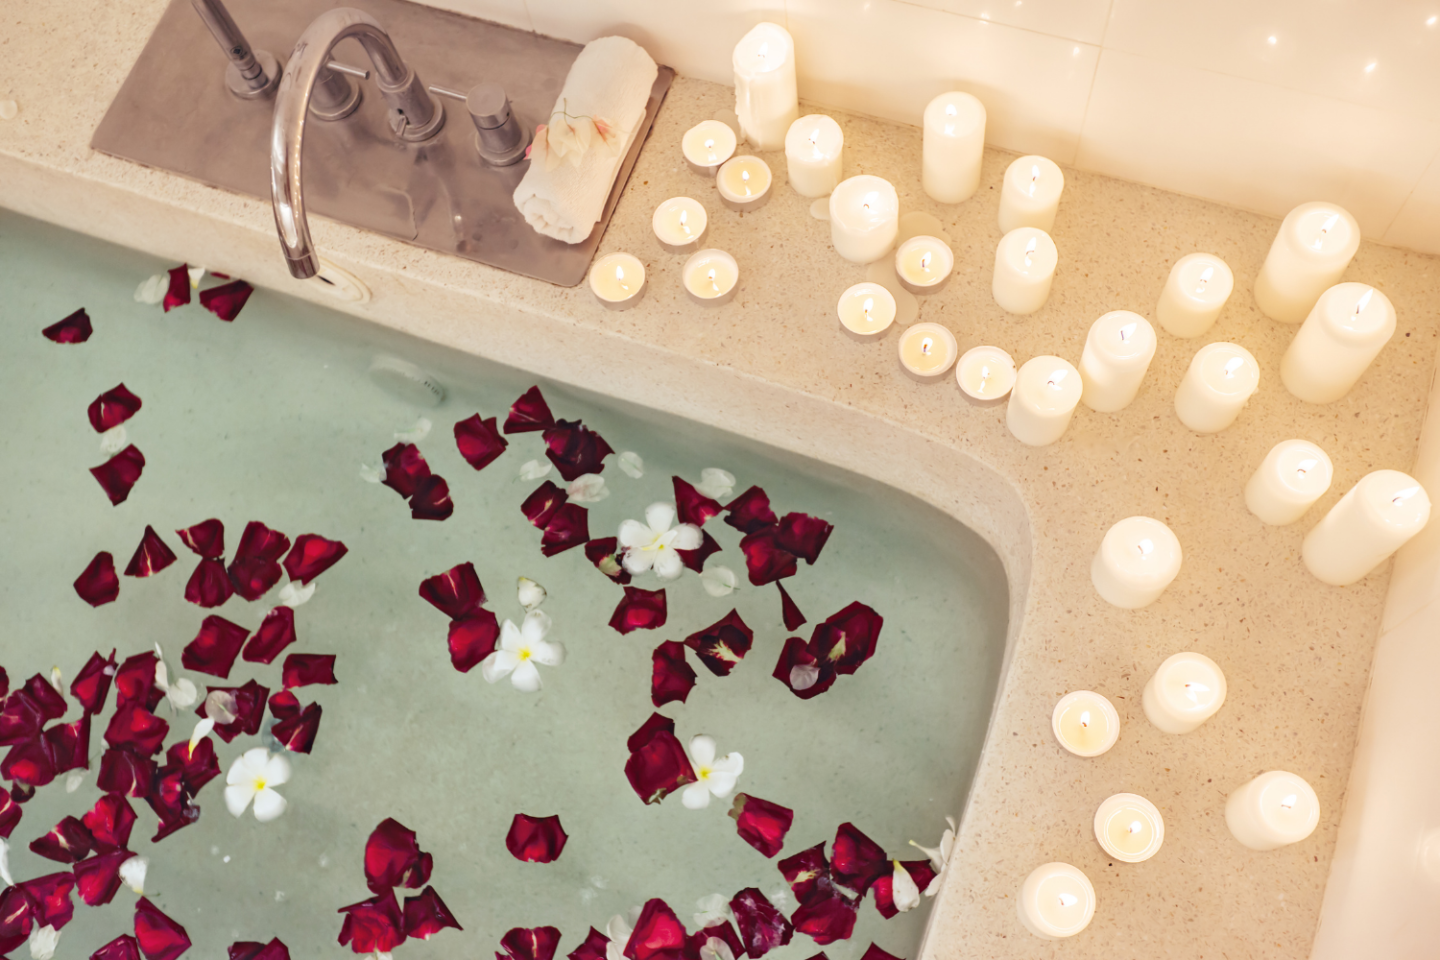 Red Rose Petal Bath with Candles